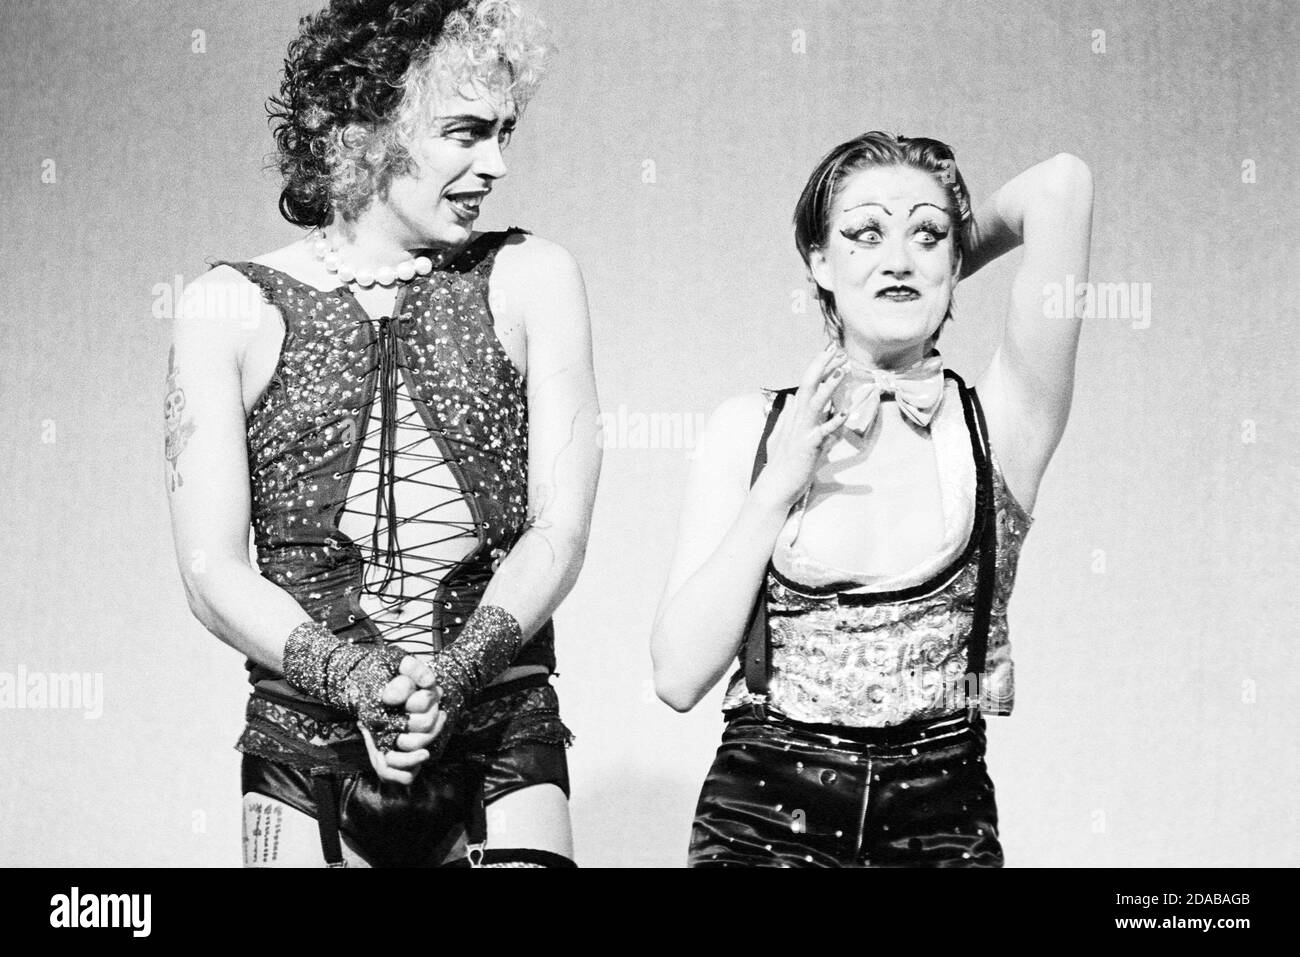 Tim Curry (Frank-n-furter), Little Nell (Columbia) in THE ROCKY HORROR SHOW at the Chelsea Classic Cinema, London SW3 14/08/1973  transfer from the the Theatre Upstairs, Royal Court Theatre  book, music & lyrics by Richard O'Brien  set design: Brian Thomson  costumes: Sue Blane  lighting: Gerry Jenkinson  director: Jim Sharman Stock Photo